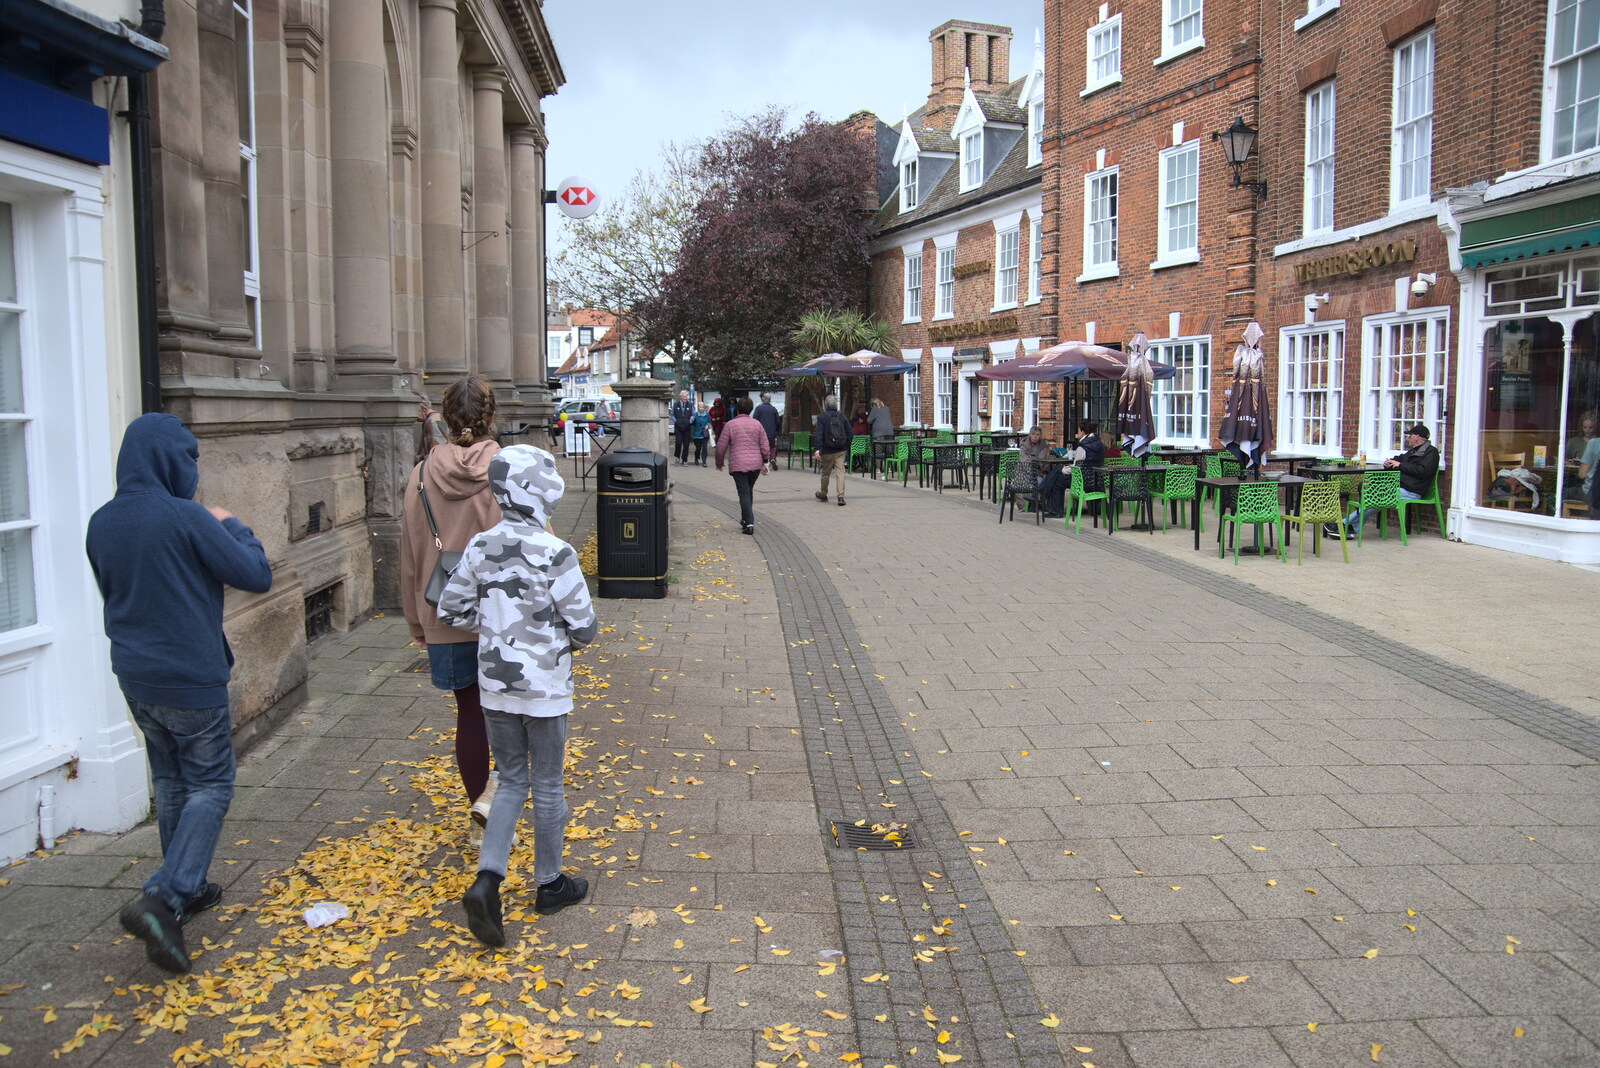 An Afternoon in Beccles, Suffolk - 26th October 2022: Golden leaves blow around on Sheepgate